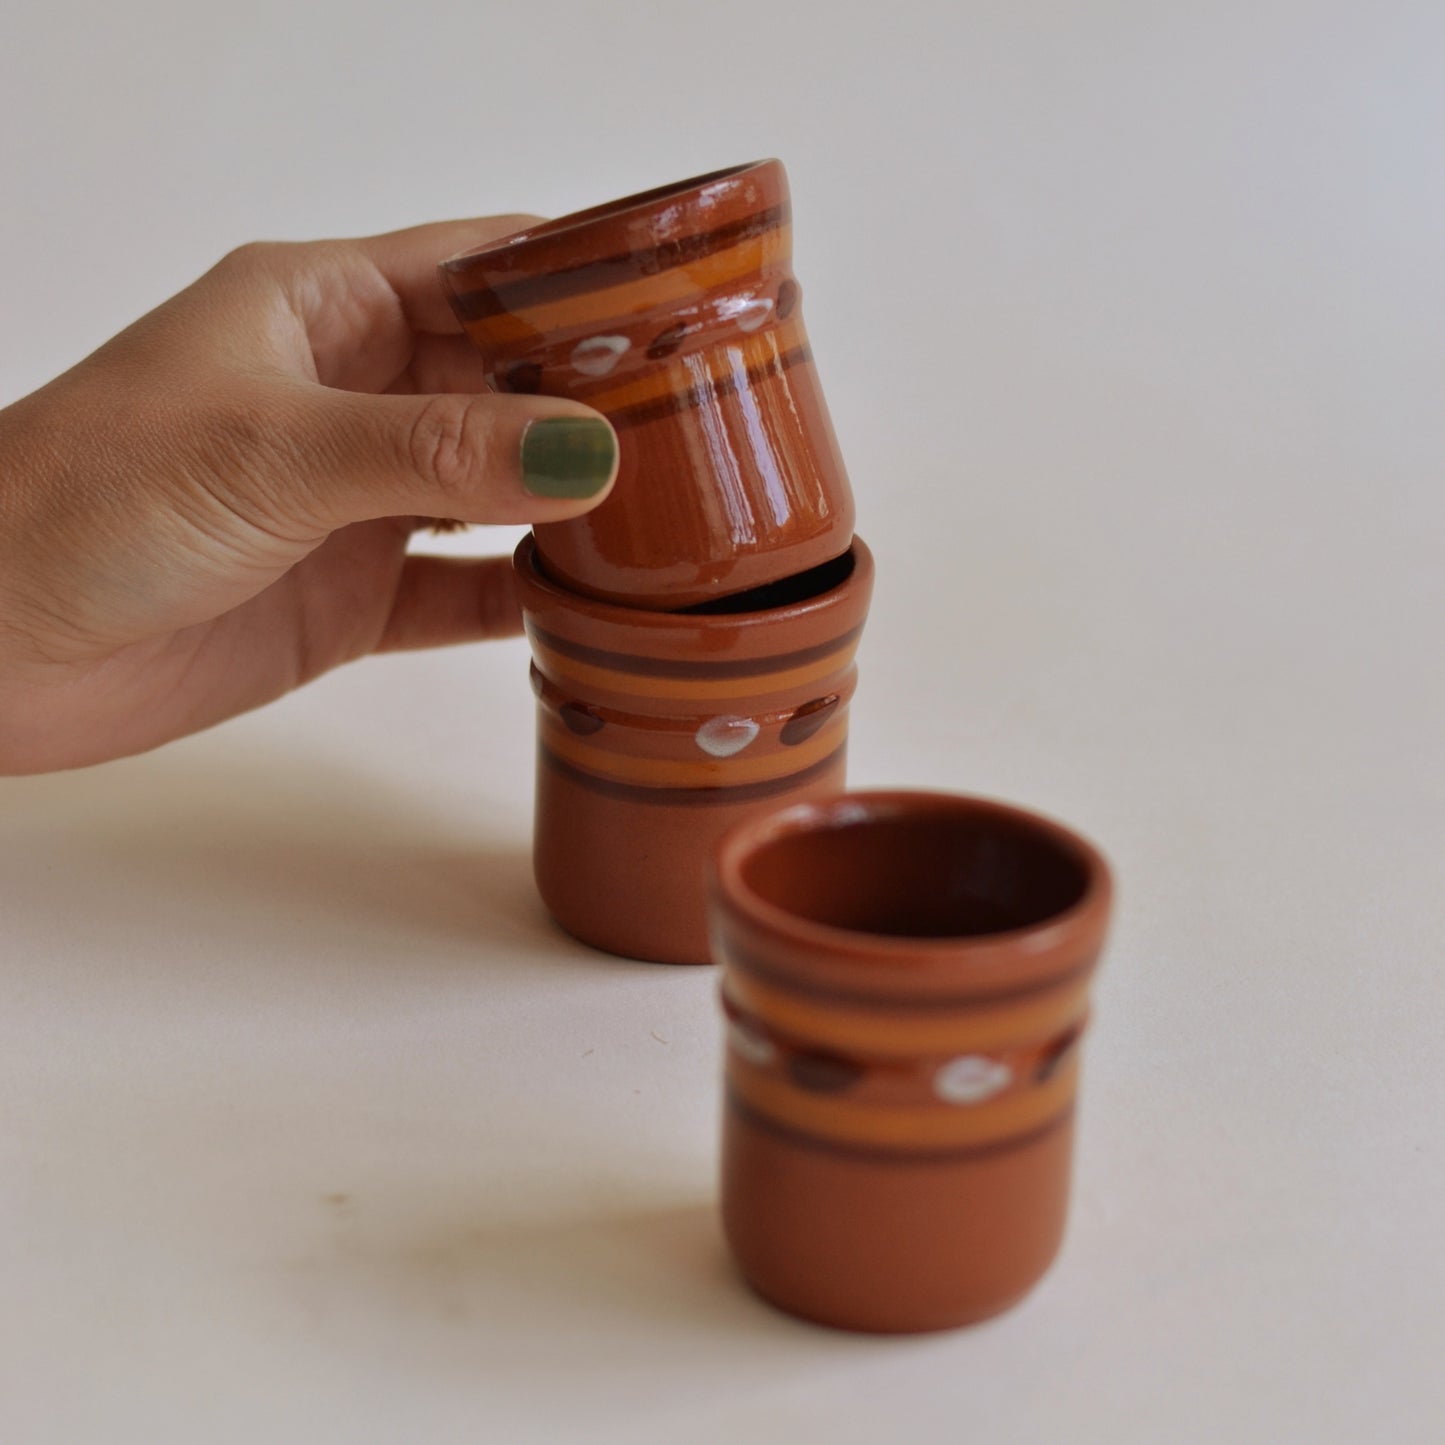 Pottery Match or Toothpick Holders